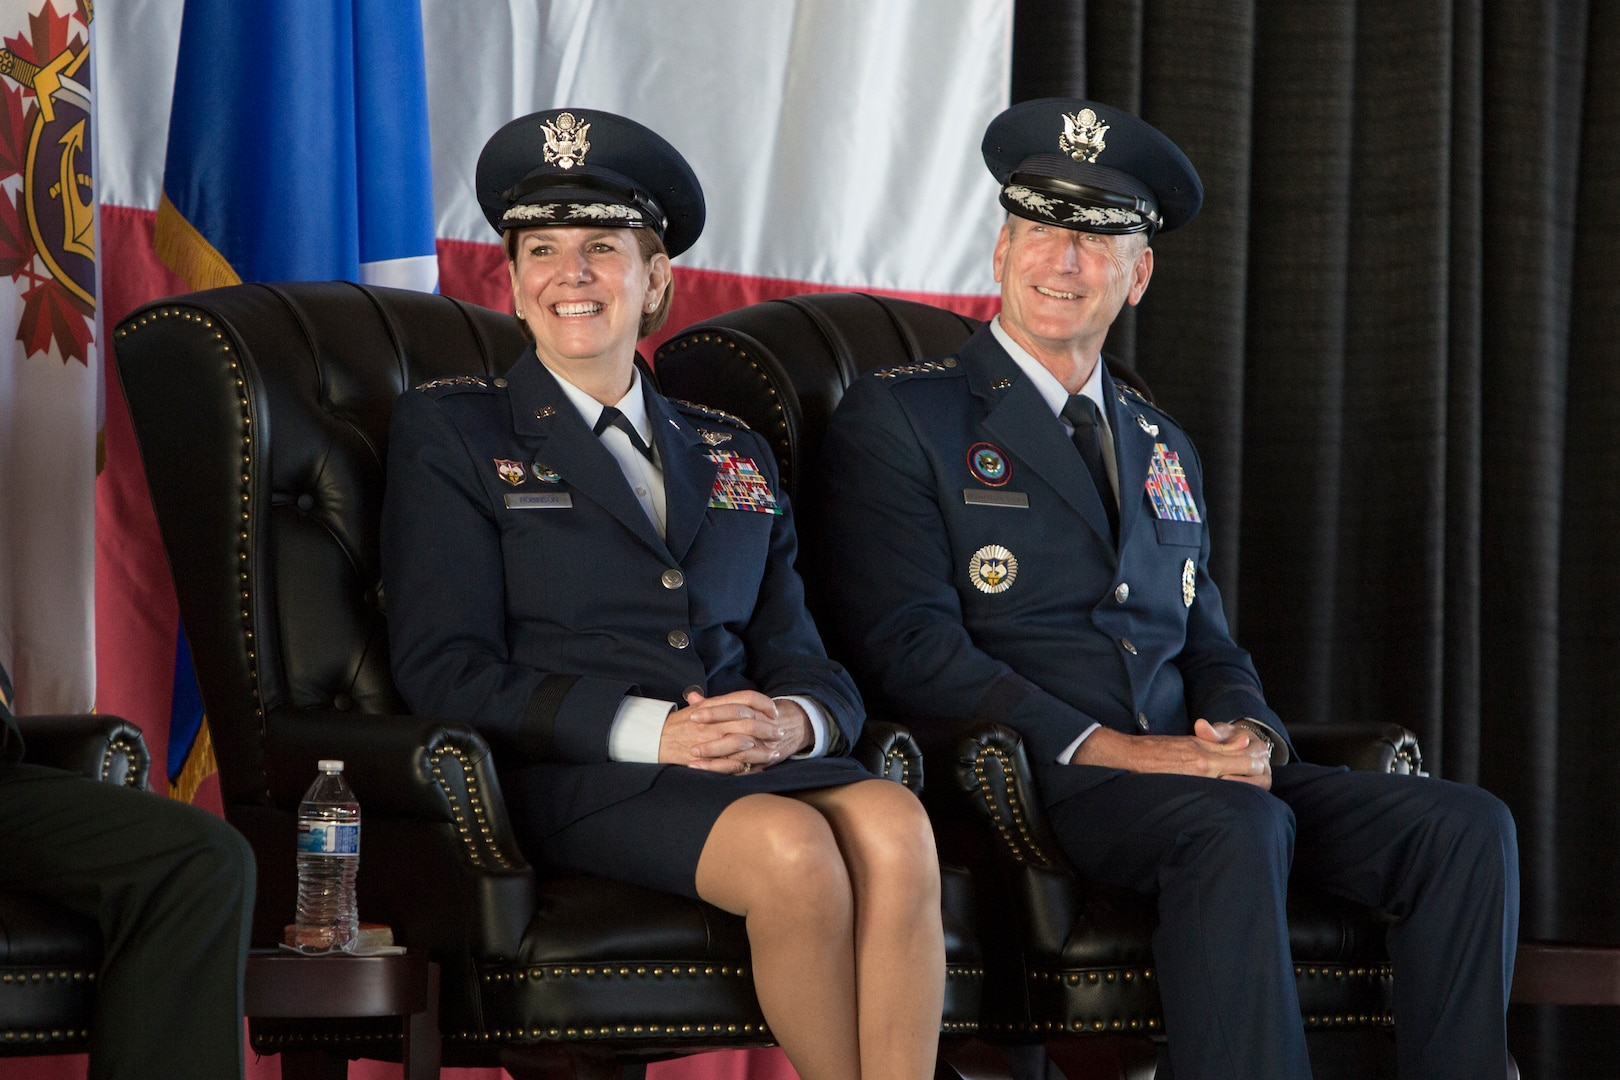 Air Force Gen. Terrence J. O'Shaughnessy assumed command of the North American Aerospace Defense Command and United States Northern Command from Air Force Gen. Lori Robinson during a ceremony held at Peterson Air Force Base today.